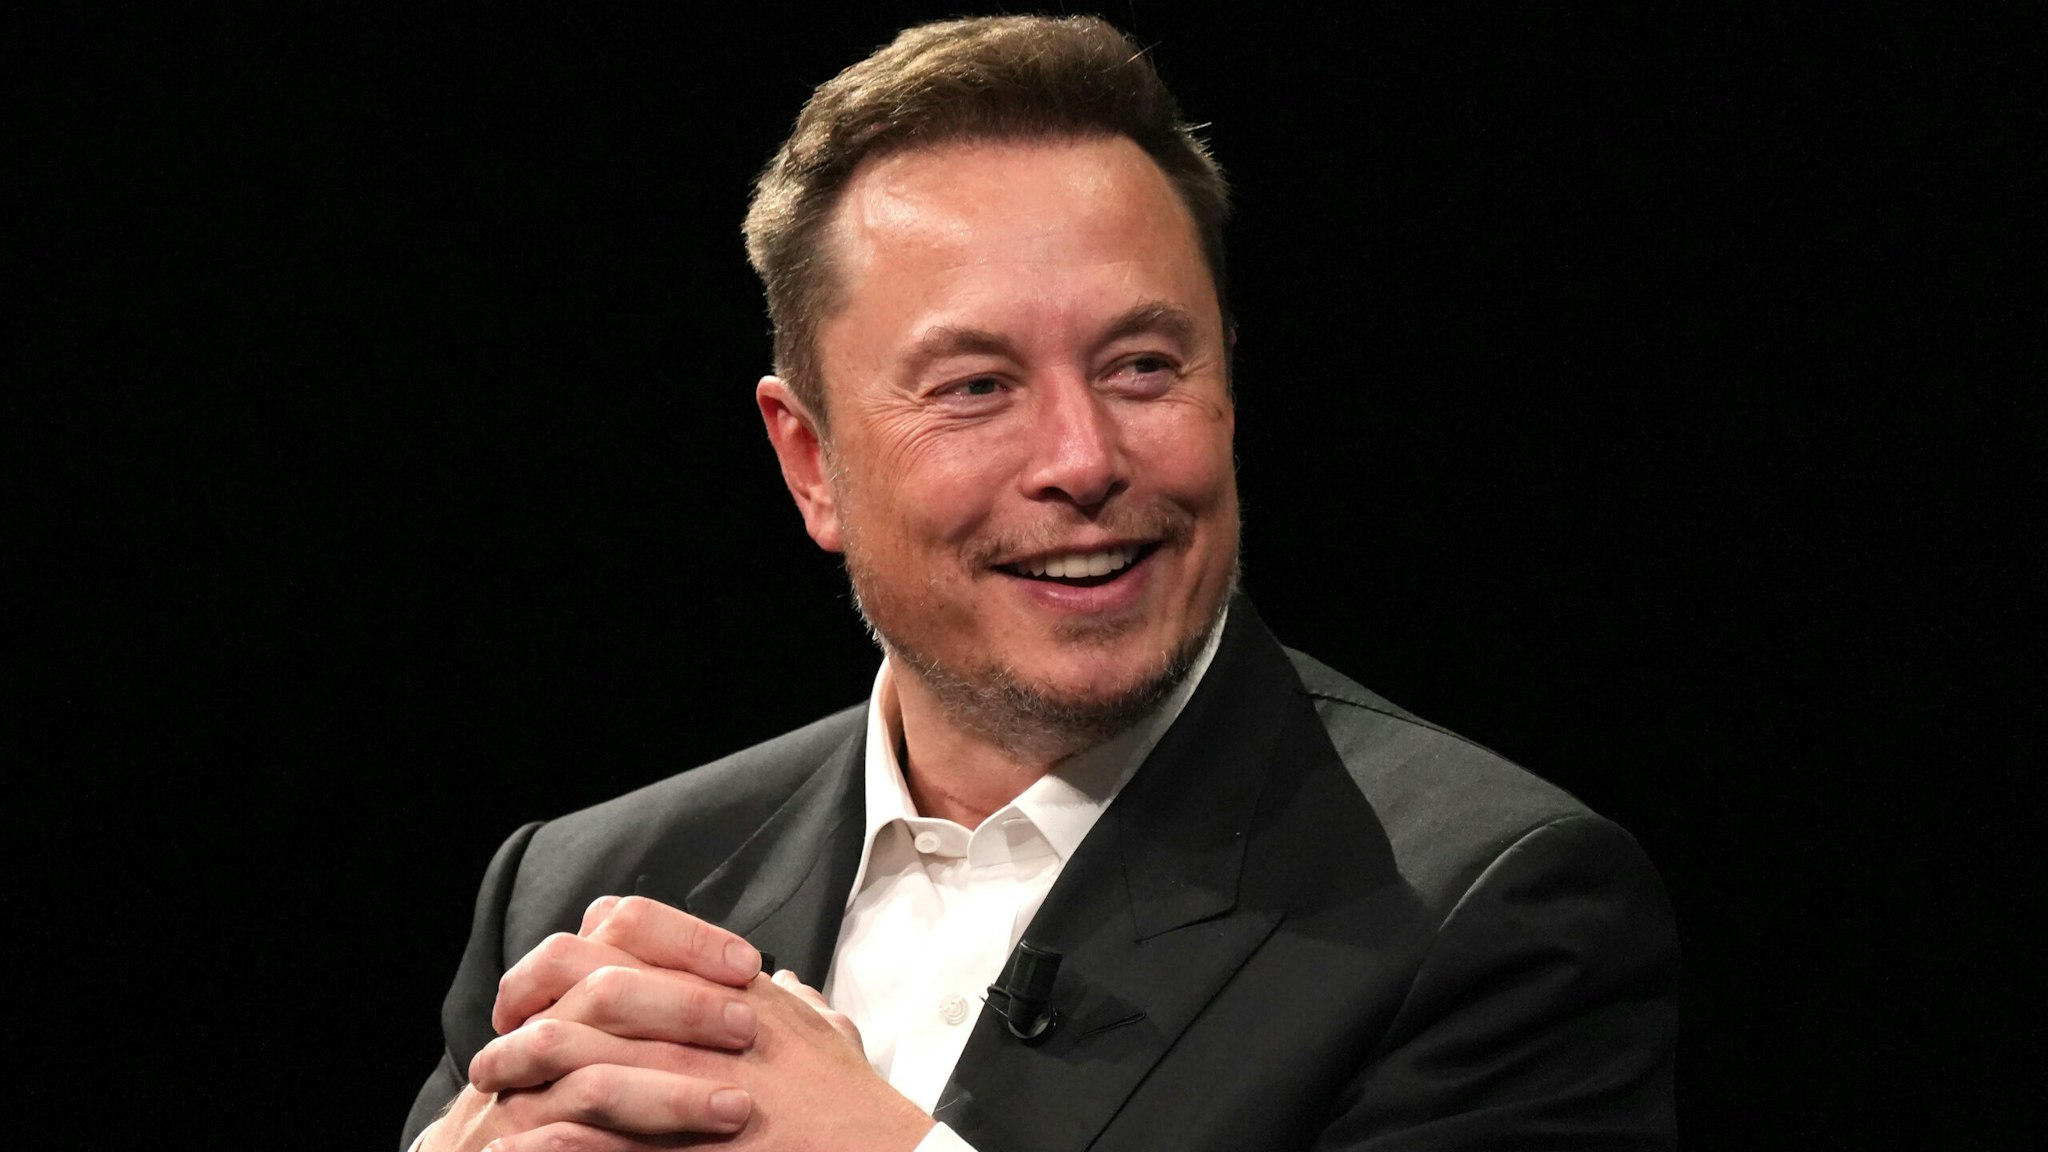 Elon Musk, billionaire and chief executive officer of Tesla, at the Viva Tech fair in Paris, France, on Friday, June 16, 2023. Musk predicted his Neuralink Corp. would carry out its first brain implant later this year.